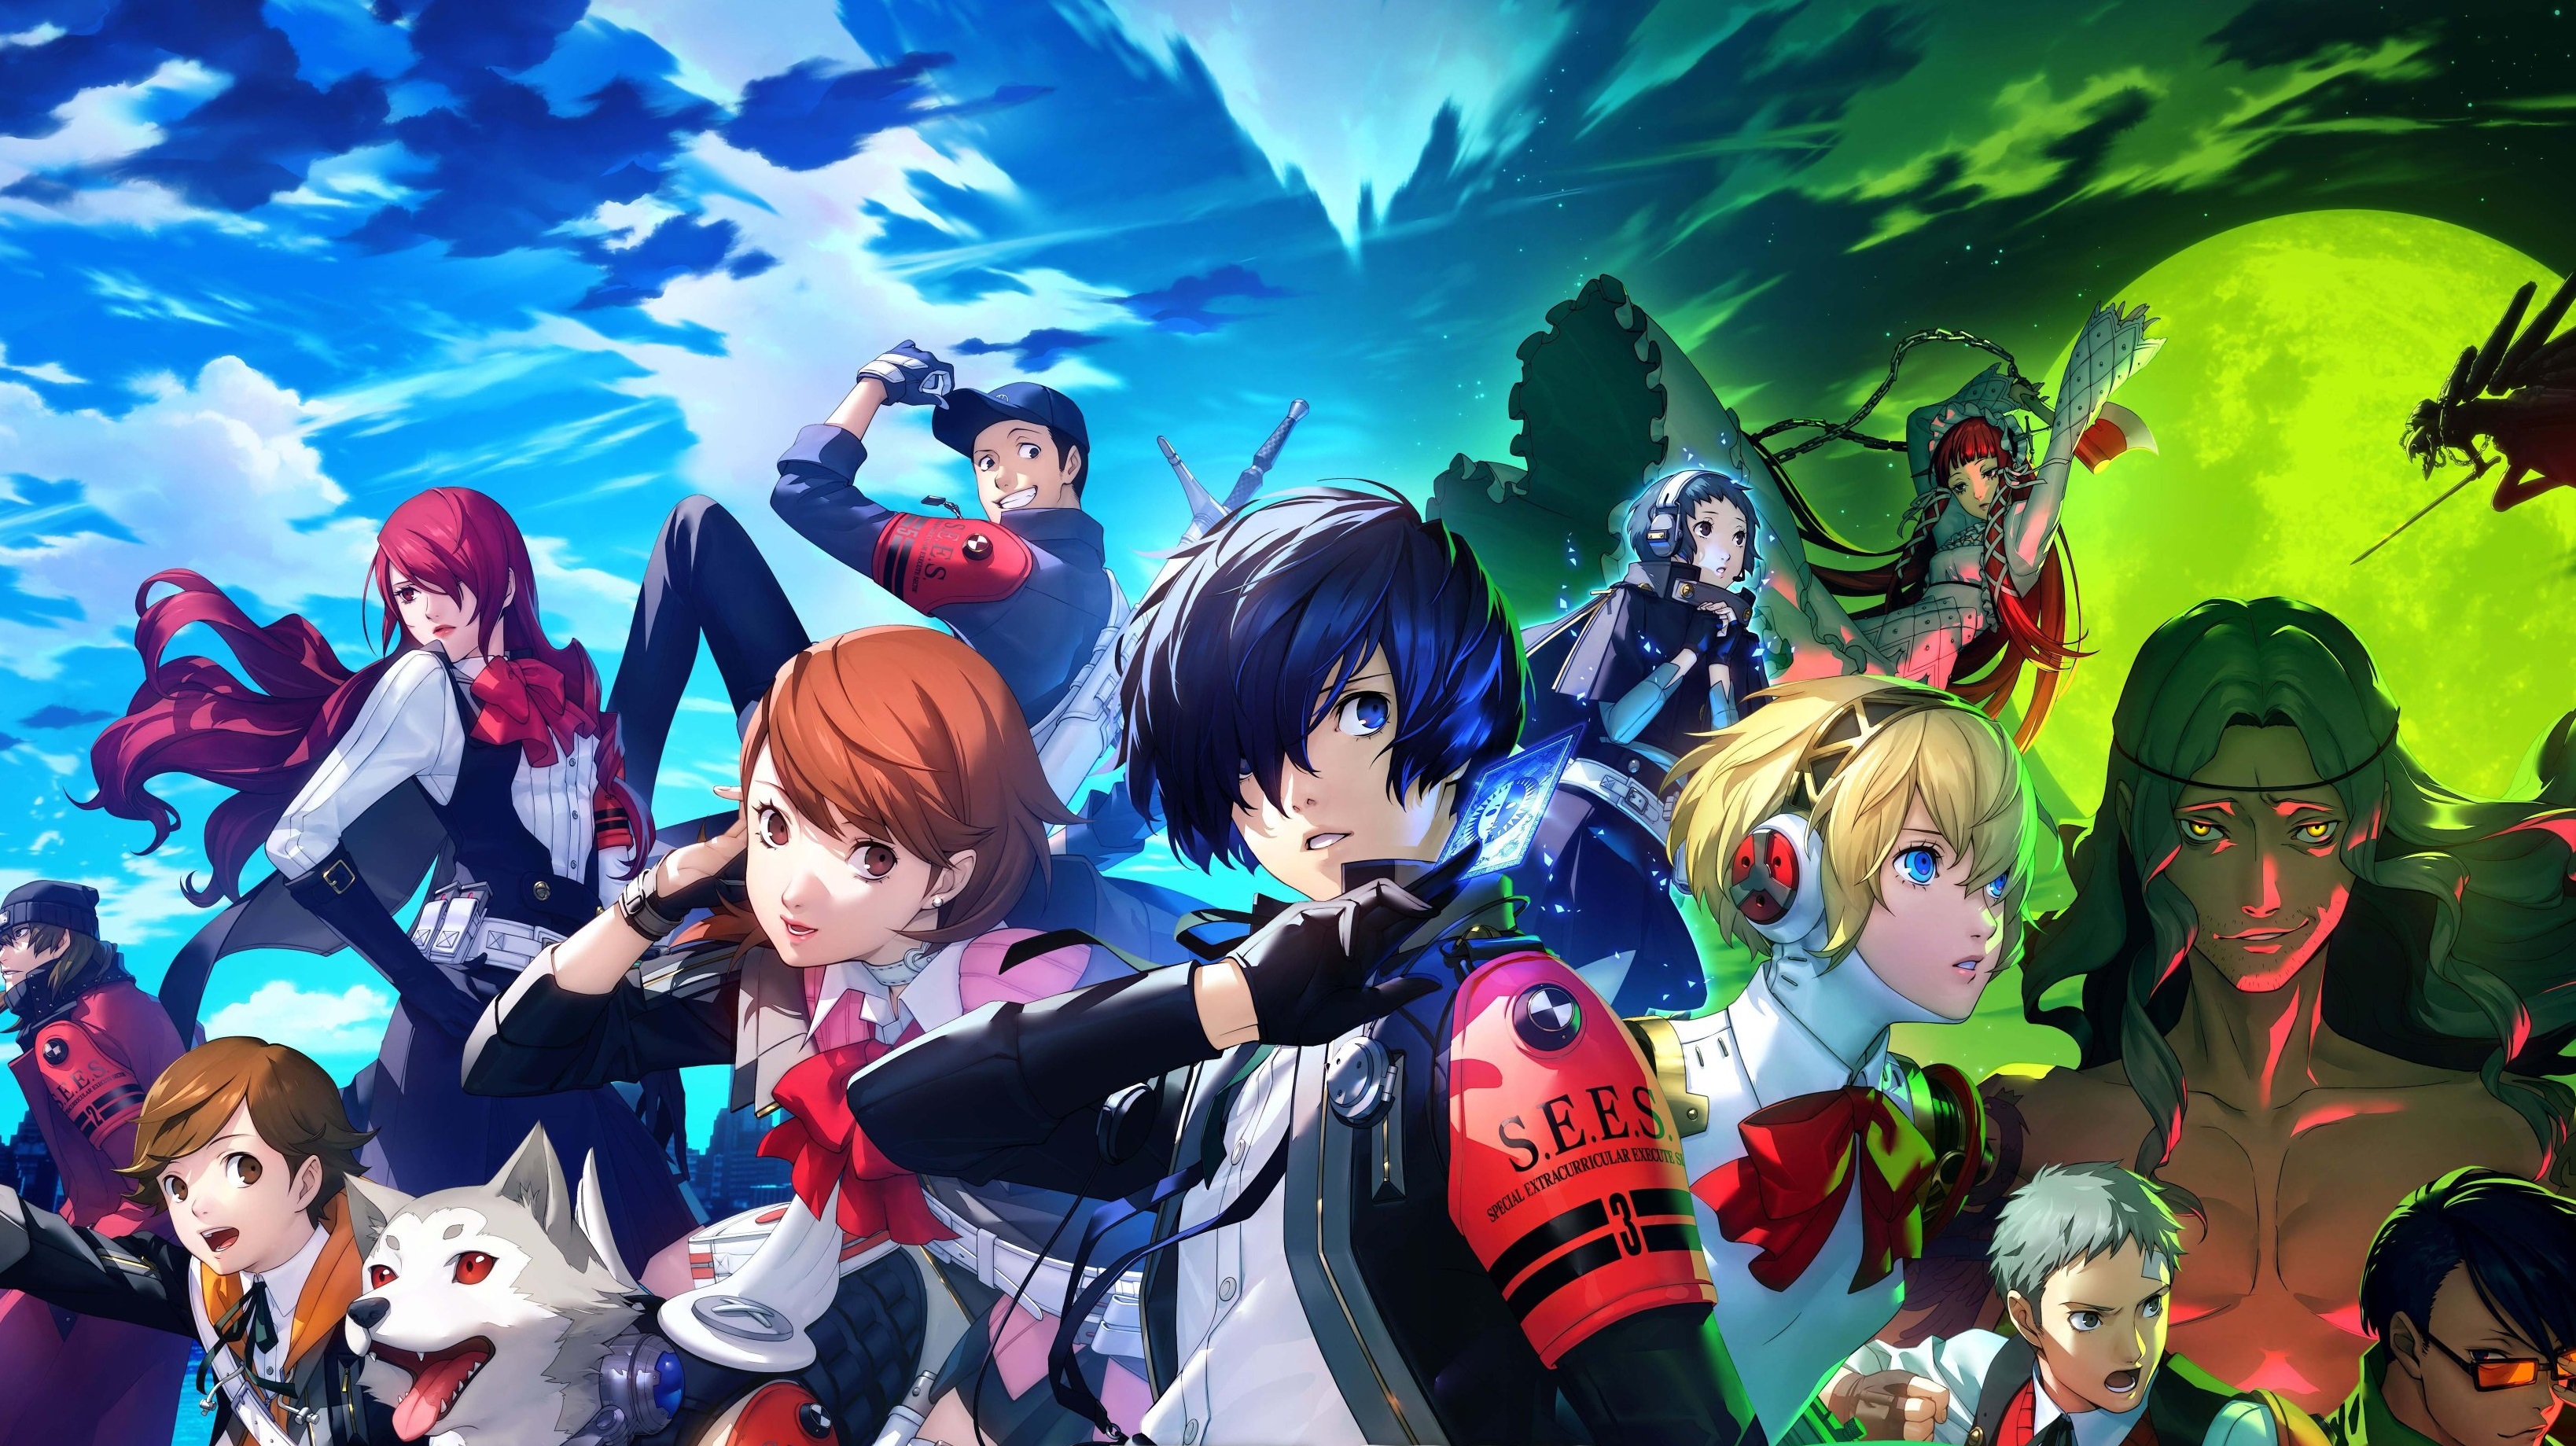 Persona 3 Reload game release date, news & gameplay